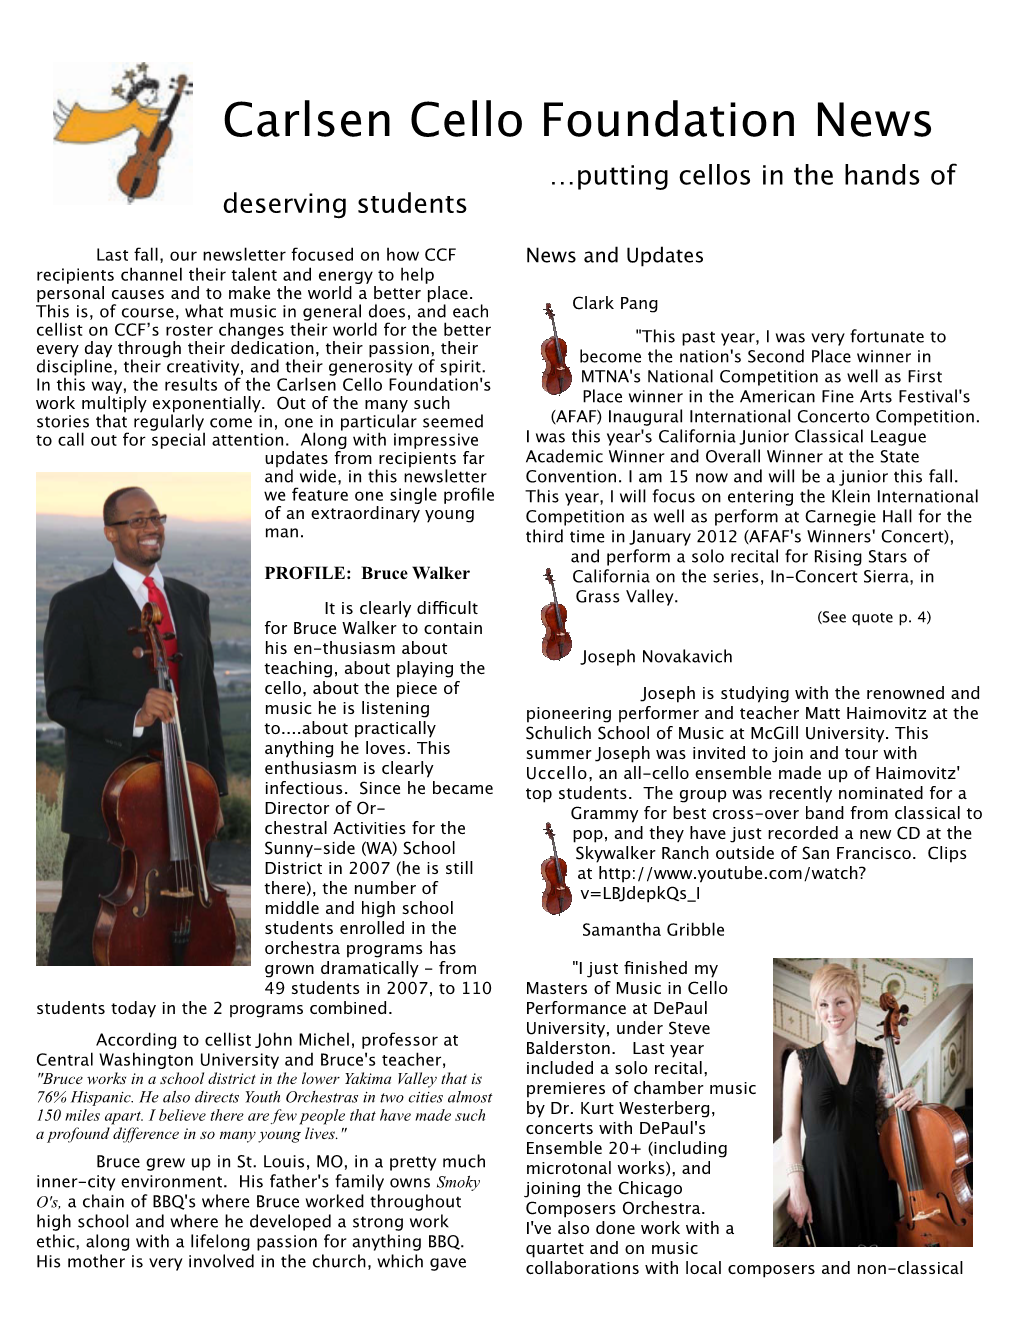 Carlsen Cello Foundation News …Putting Cellos in the Hands of Deserving Students